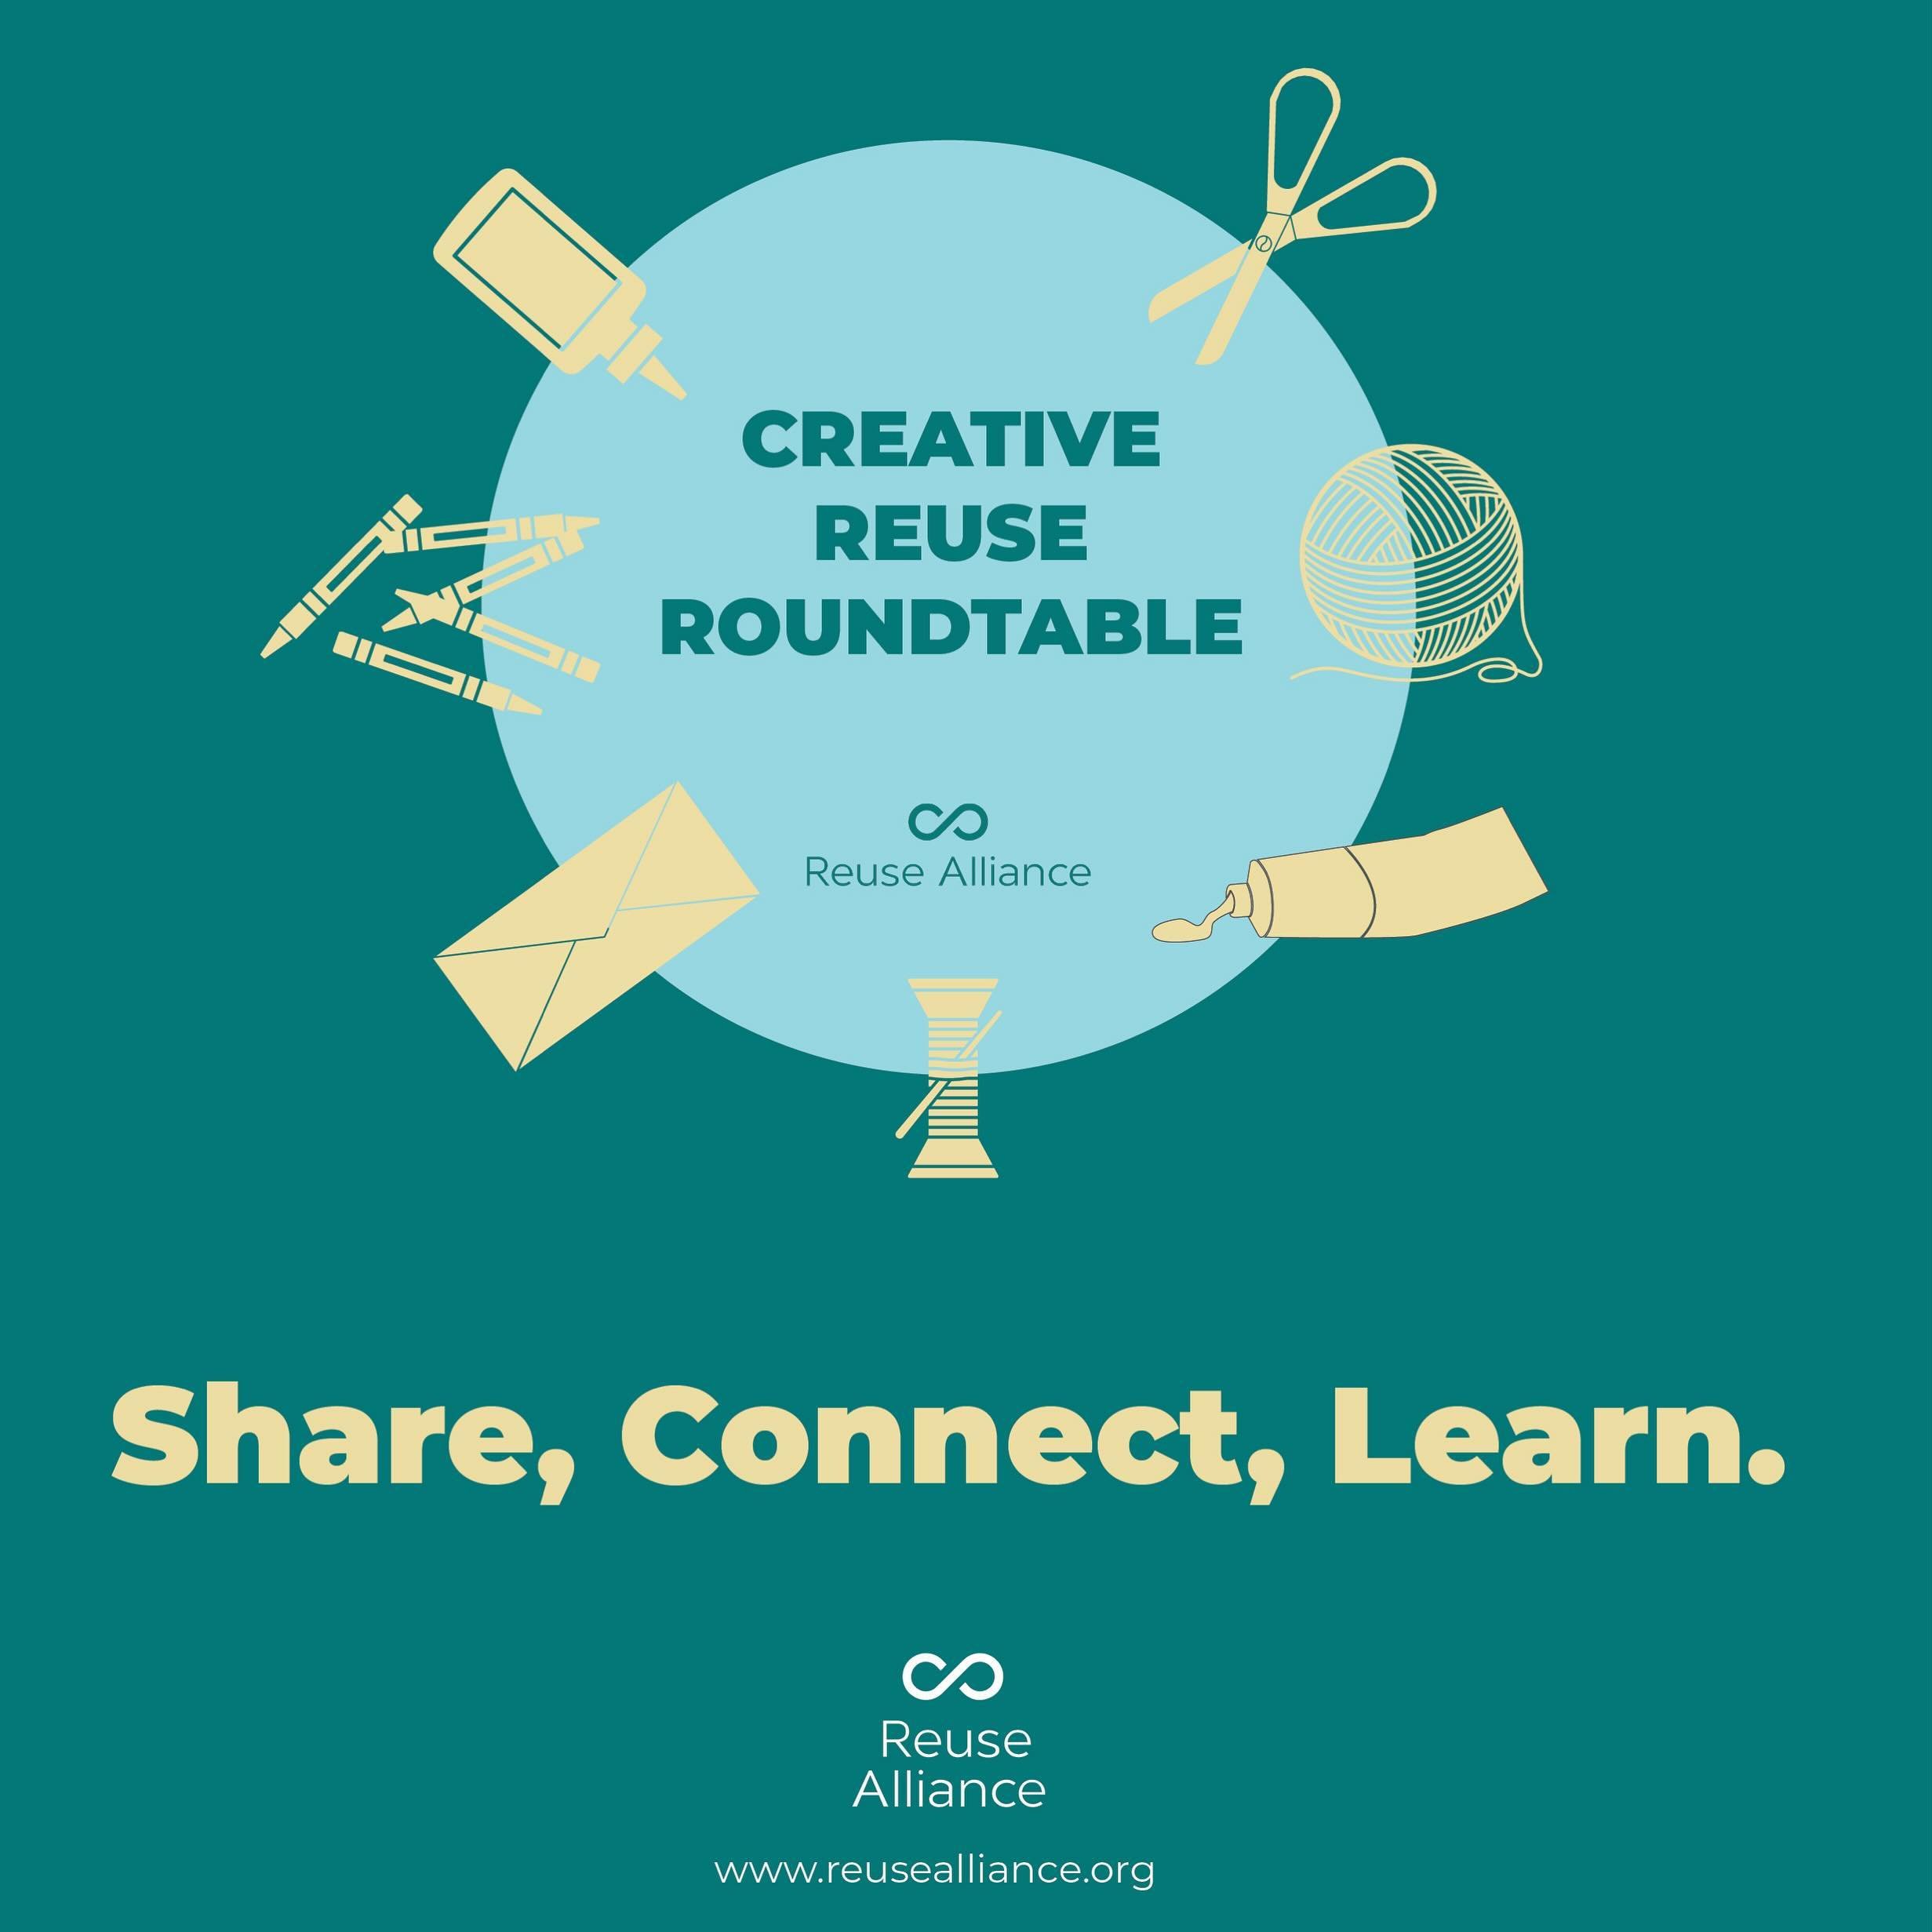 Calling all Creative Reuse Centers. Would you like to connect with your peers across the country to share data and resources? 

Join us for our first virtual Creative Reuse Center Roundtable on May 7th at 10am PST / 1pm EST. We will be hearing briefl